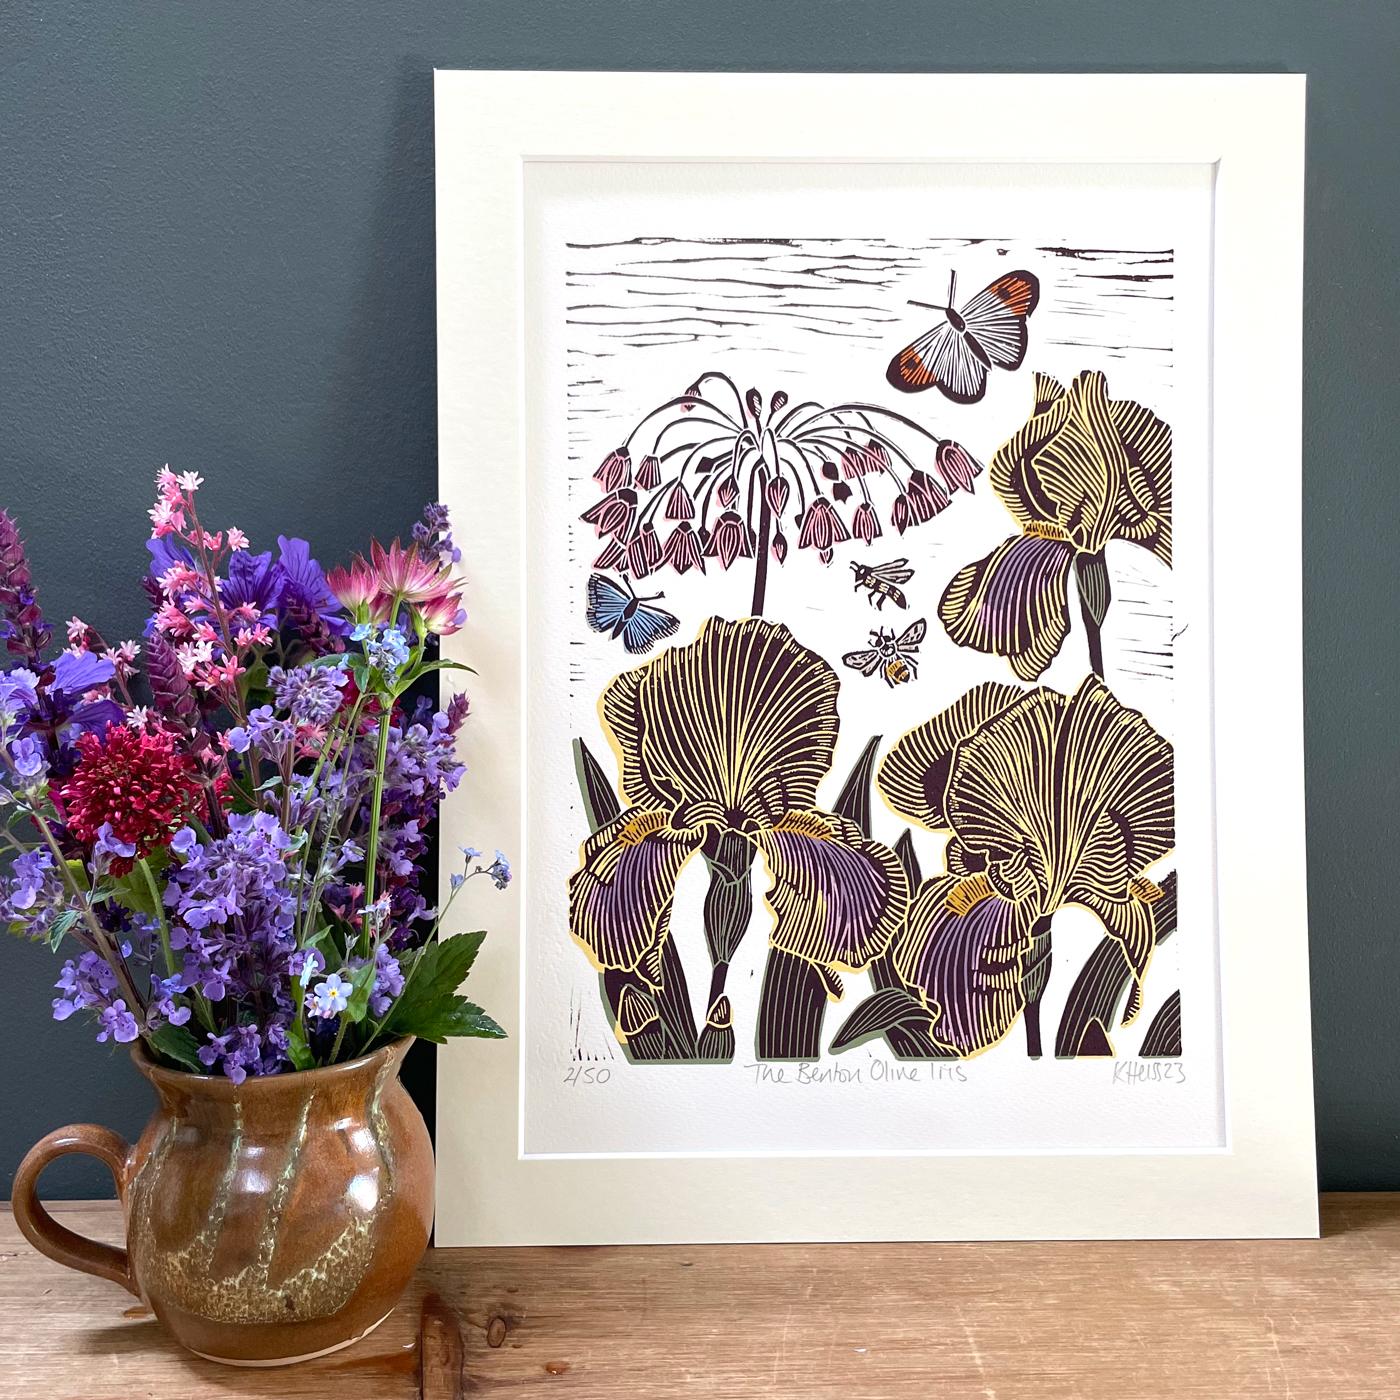 This print features a cloud of insects attracted to the Alium siculum and Benton Olive irises. This print was inspired by the beautiful Nurture Garden by Sarah Price at RHS Chelsea 2023 and her inspiration- the plantsman and painter Cedric Morris.